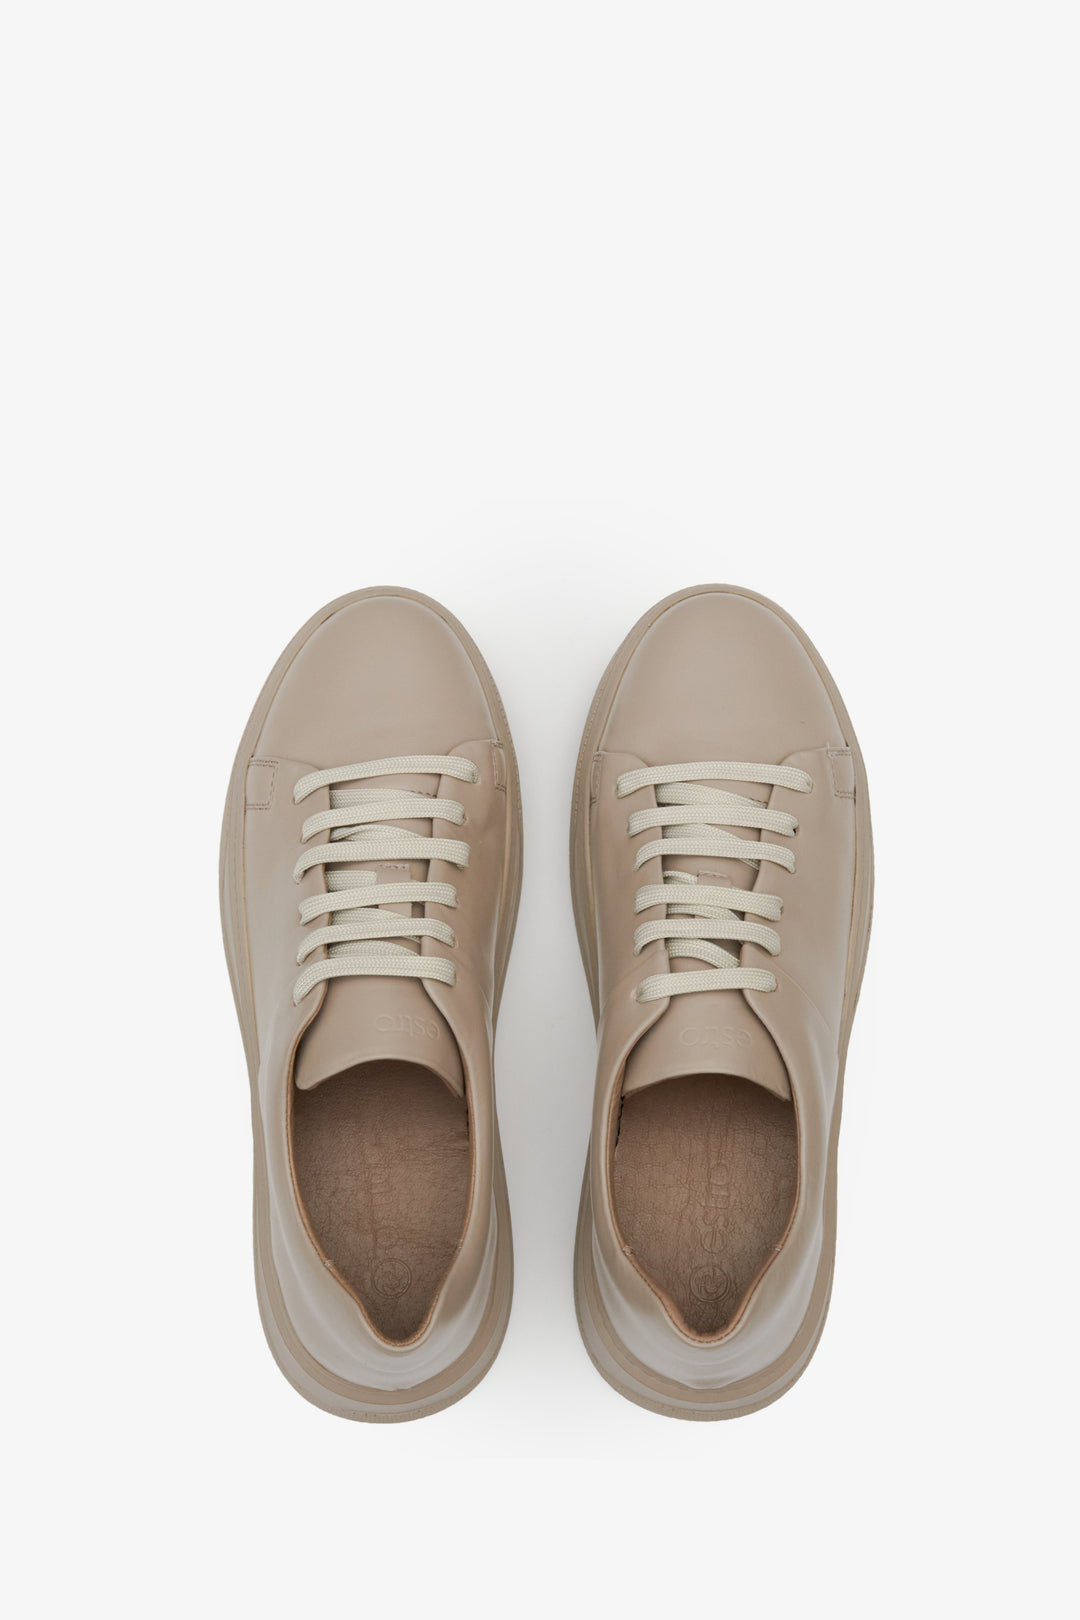 Women's beige sneakers made of genuine leather by Estro - top view presentation of the model.